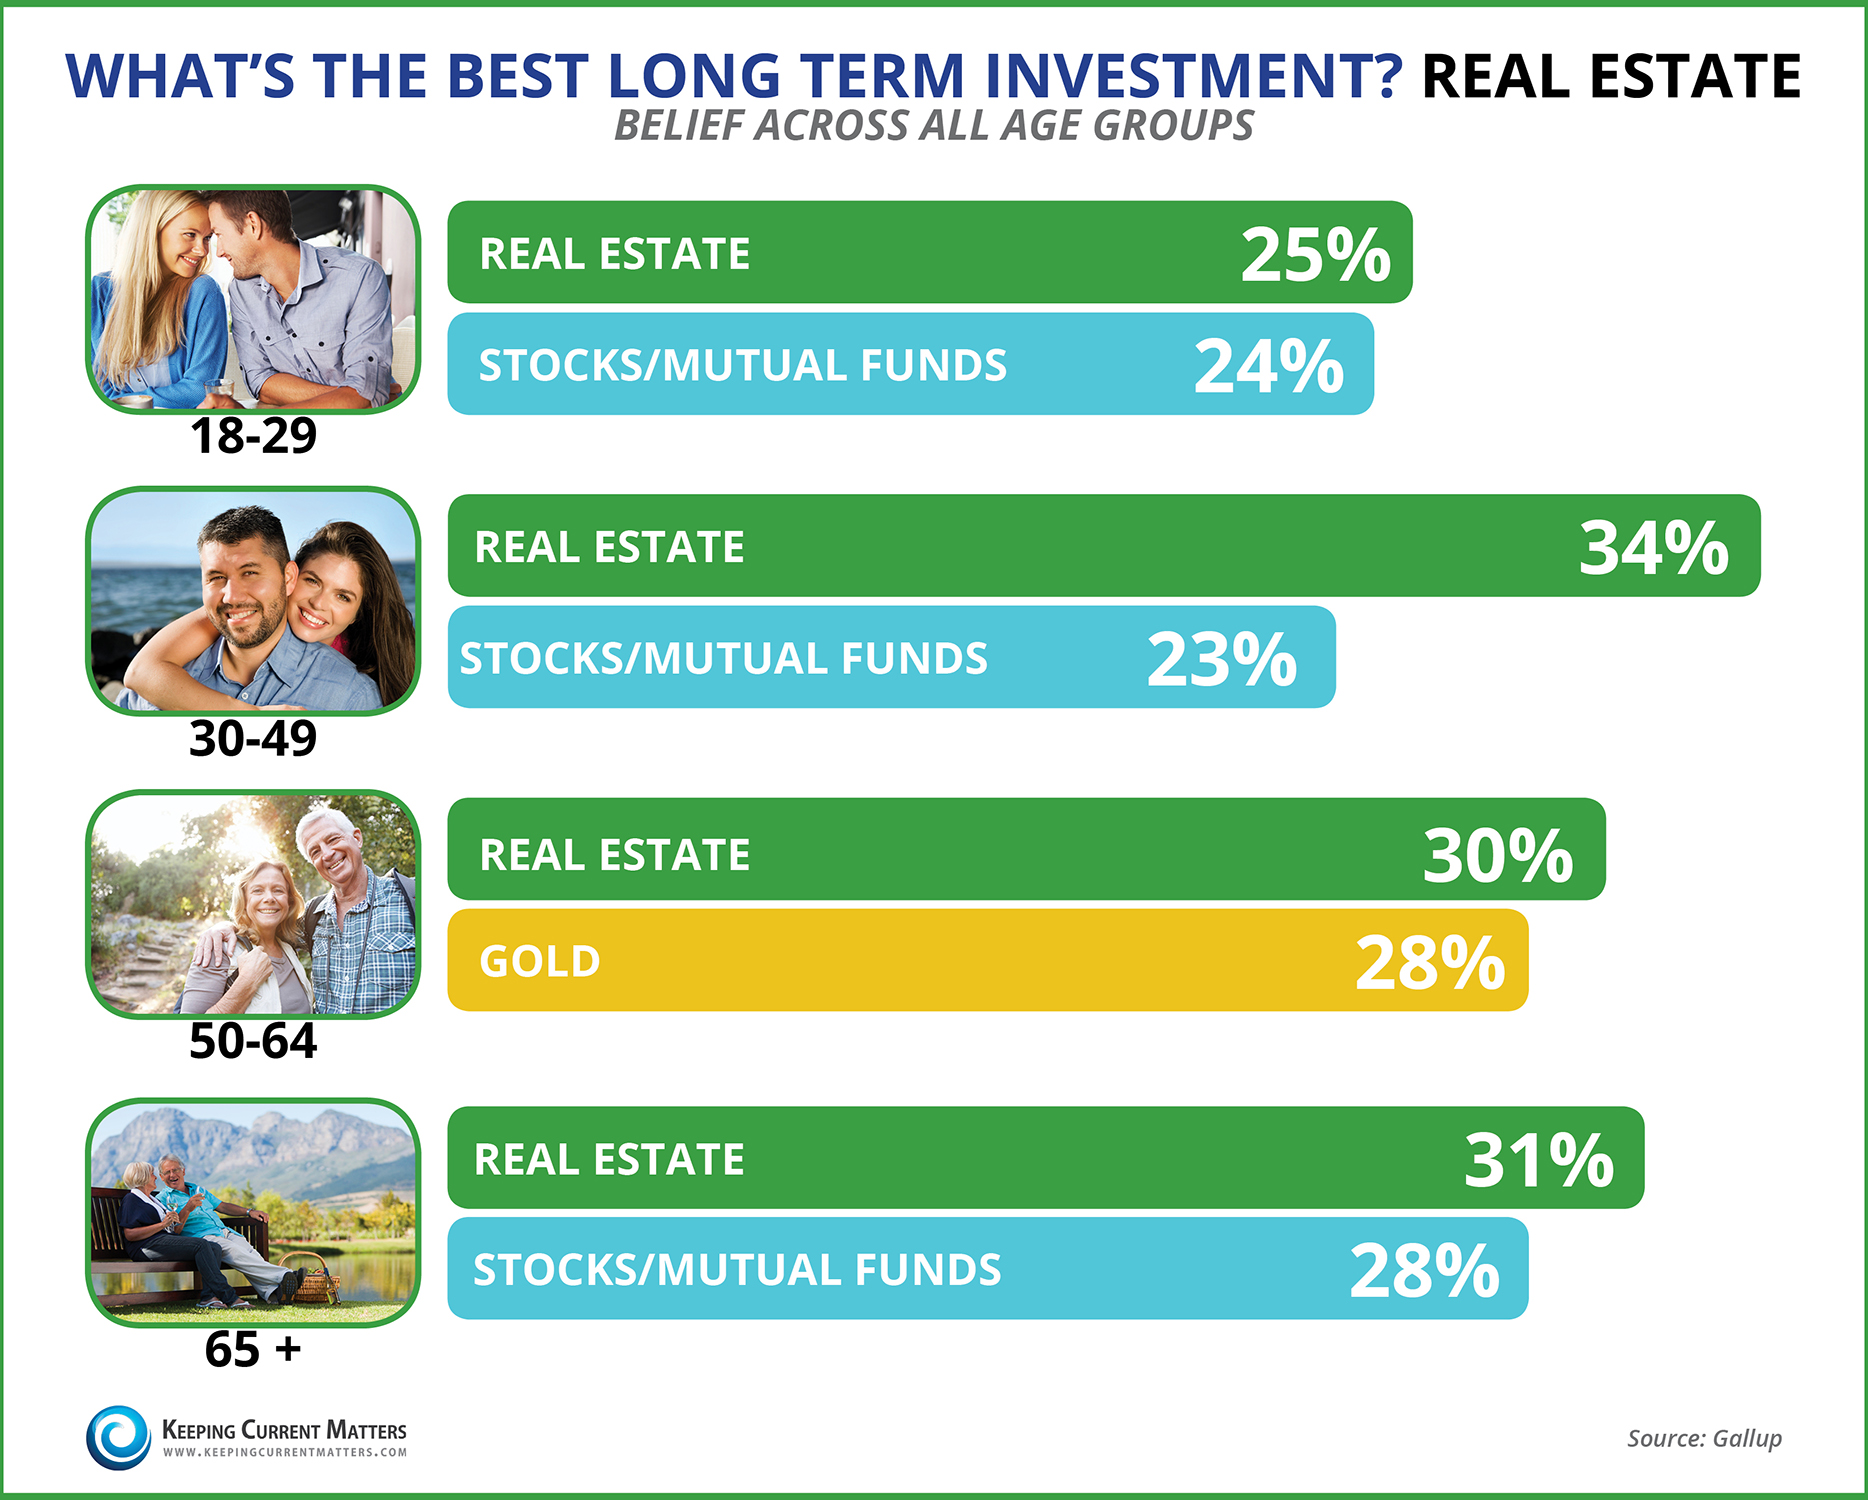 What is the best long term investment?